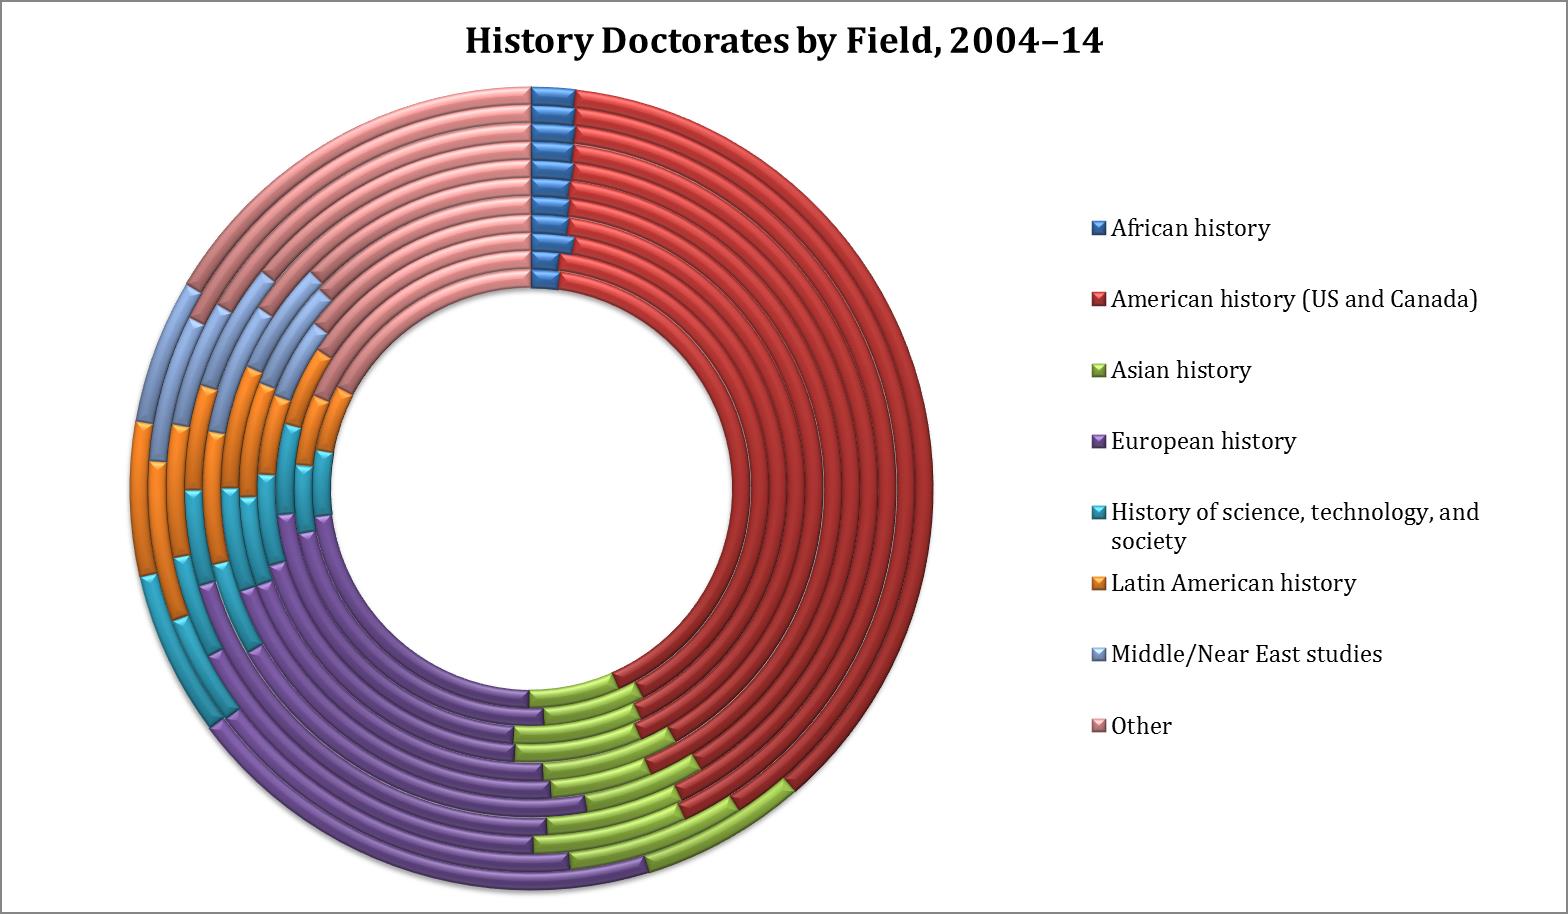 Figure 1: This chart shows 11 years of data, starting with 2004 in the innermost ring. Middle/Near East studies was added to the questionnaire in 2007. Source: Doctorate Recipients from US Universities: 2014, http://www.nsf.gov/statistics/2016/nsf16300/.